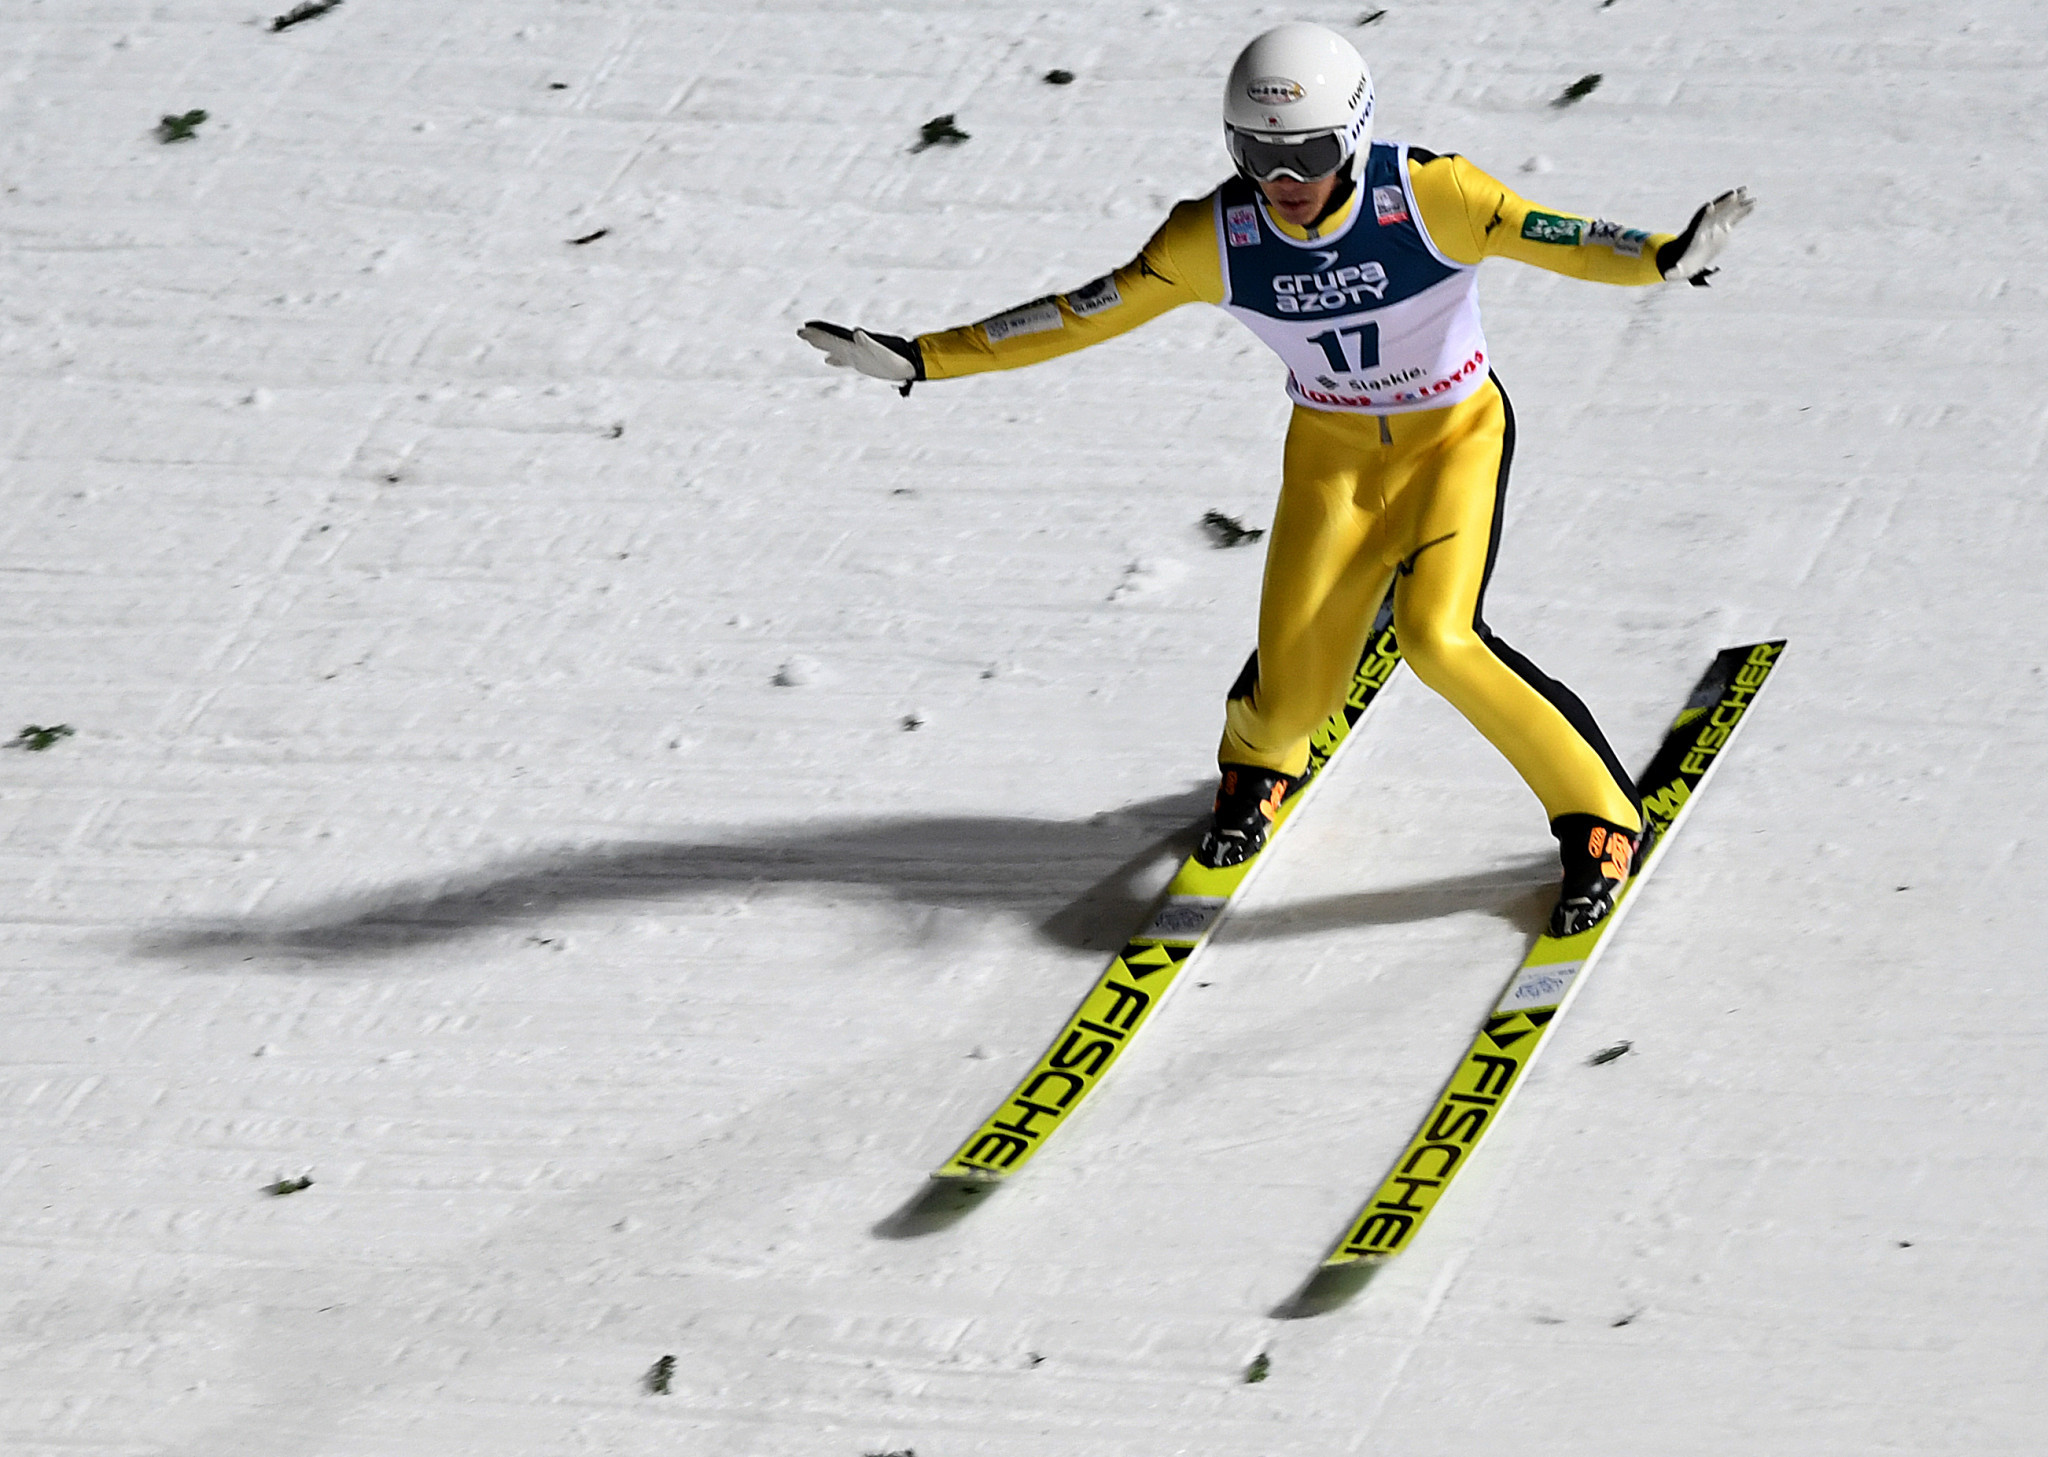 The Ski Jumping World Cup season will begin in Wisla in November ©Getty Images